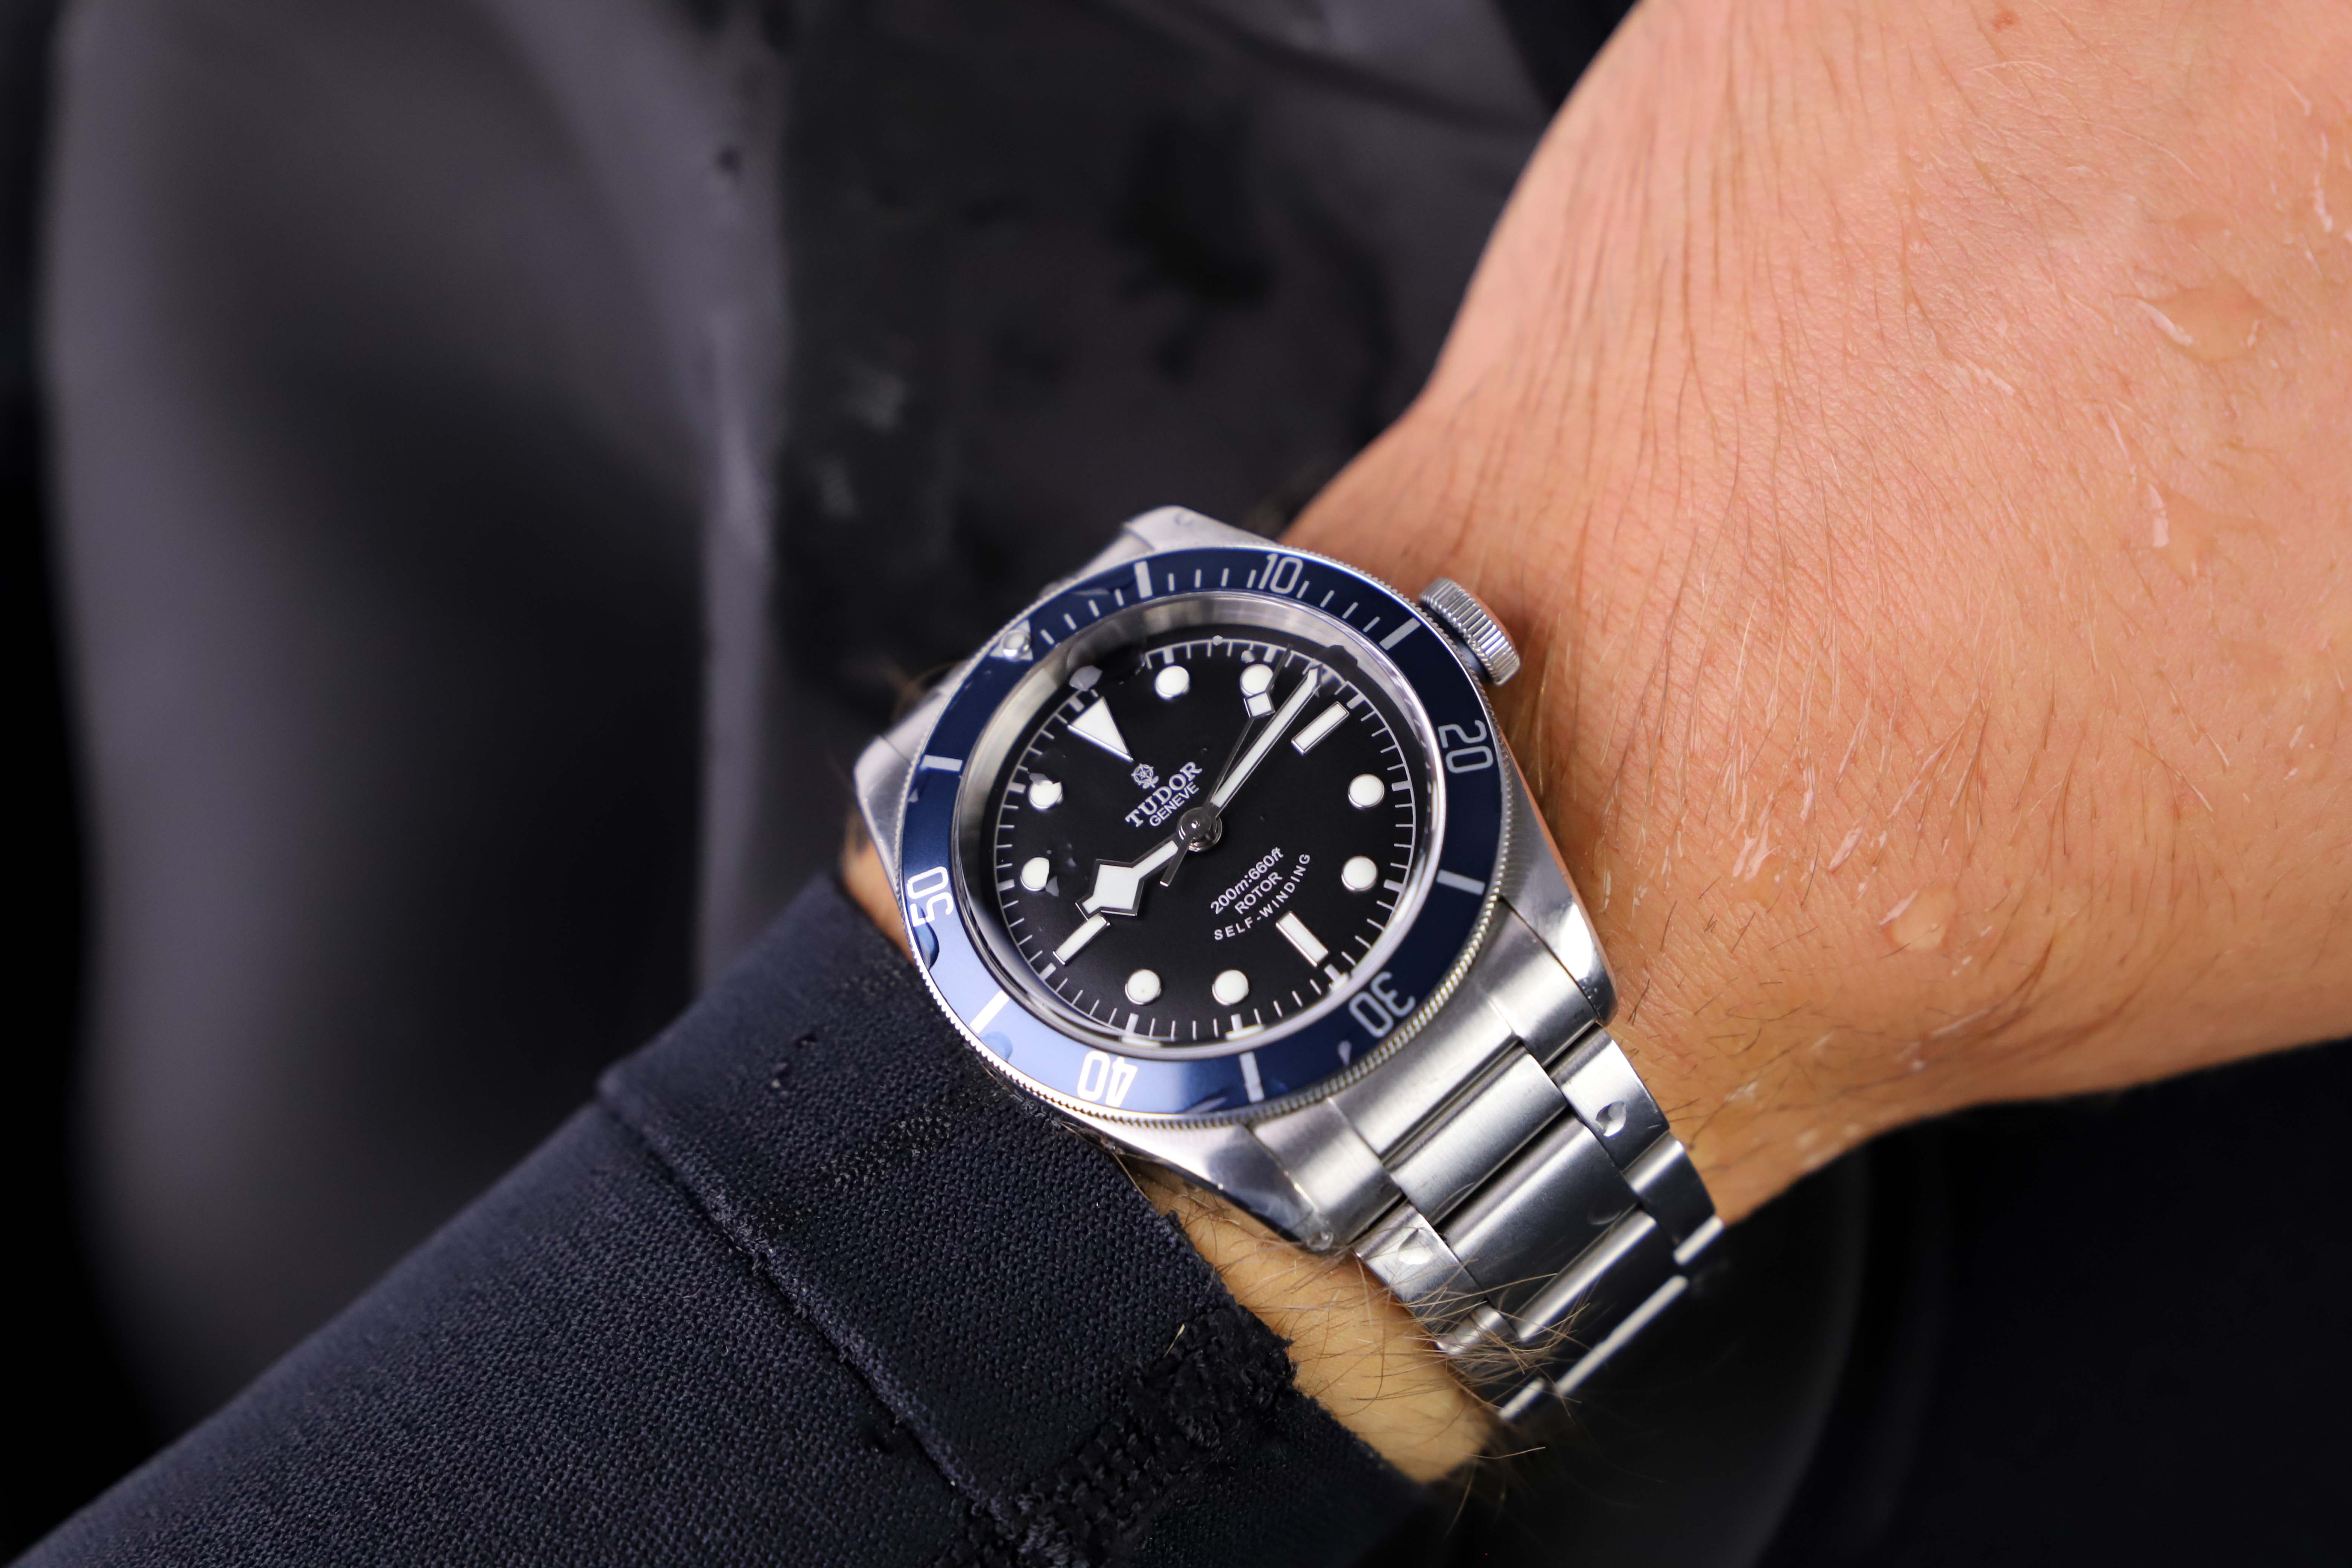 How To Remove The Bezel On Tudor Black Bay (Step-By-Step) - Millenary ...